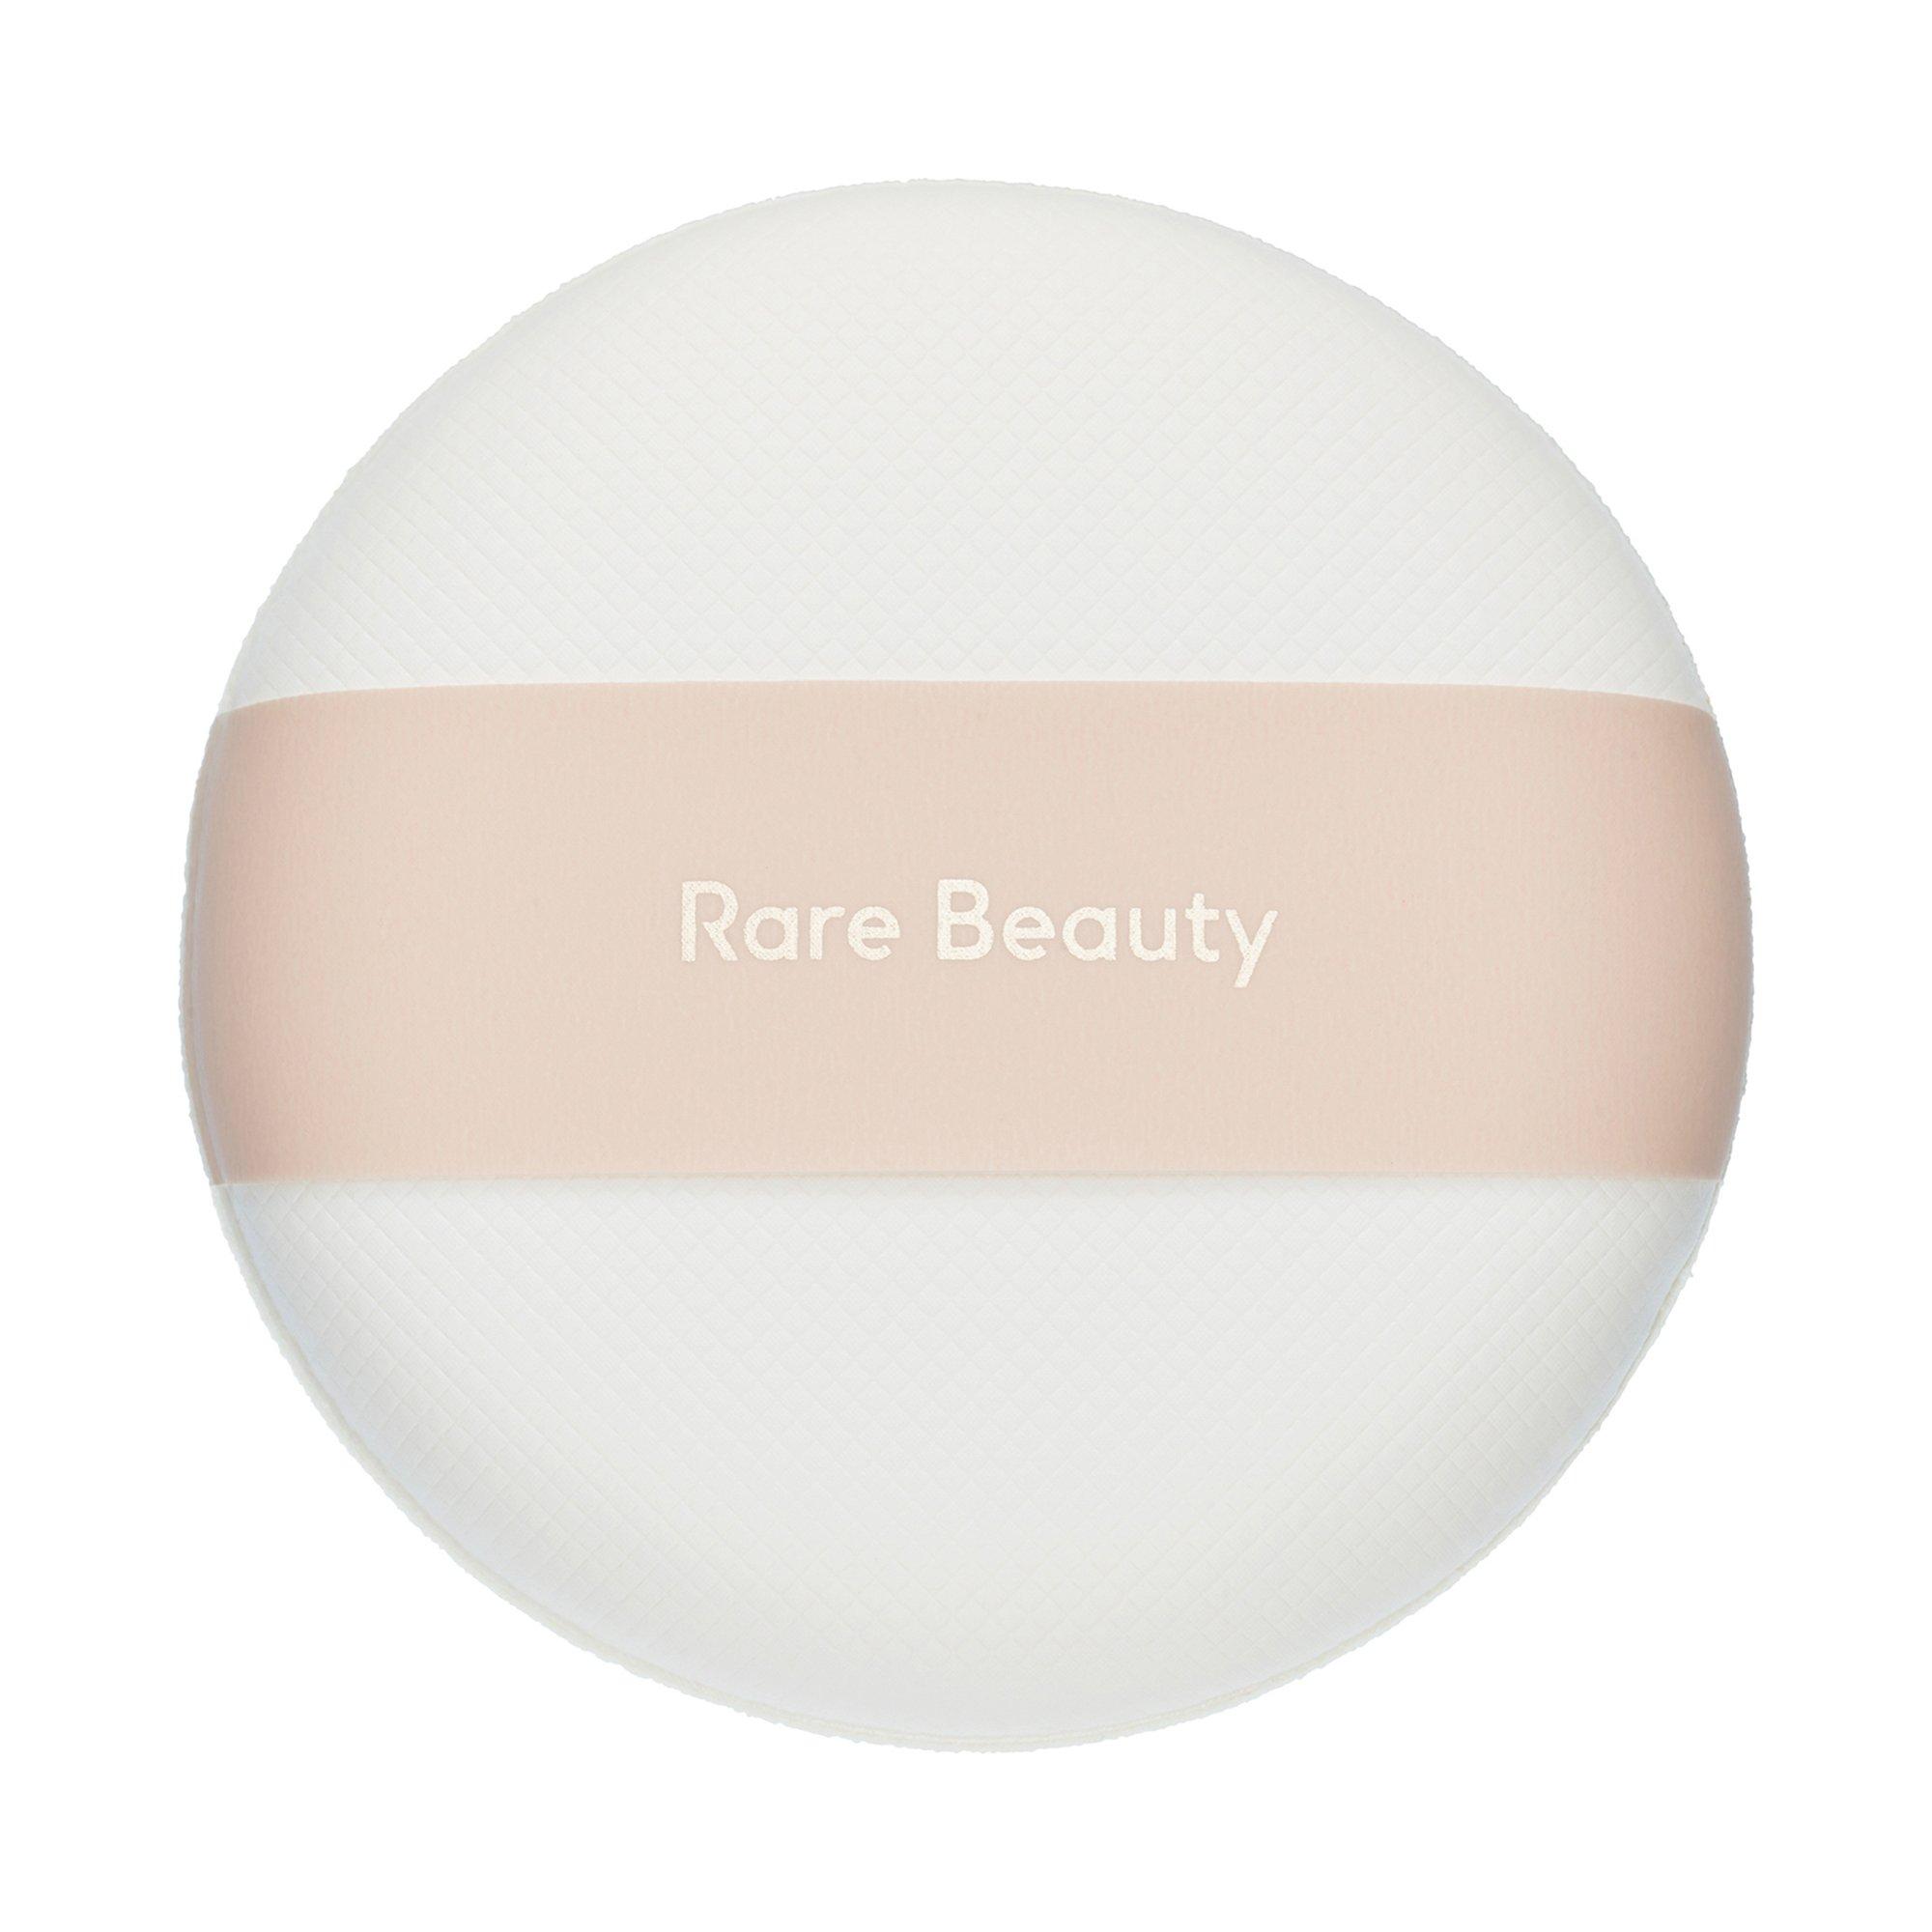 Image of RARE BEAUTY Blot & Glow Powder In Puff Refill